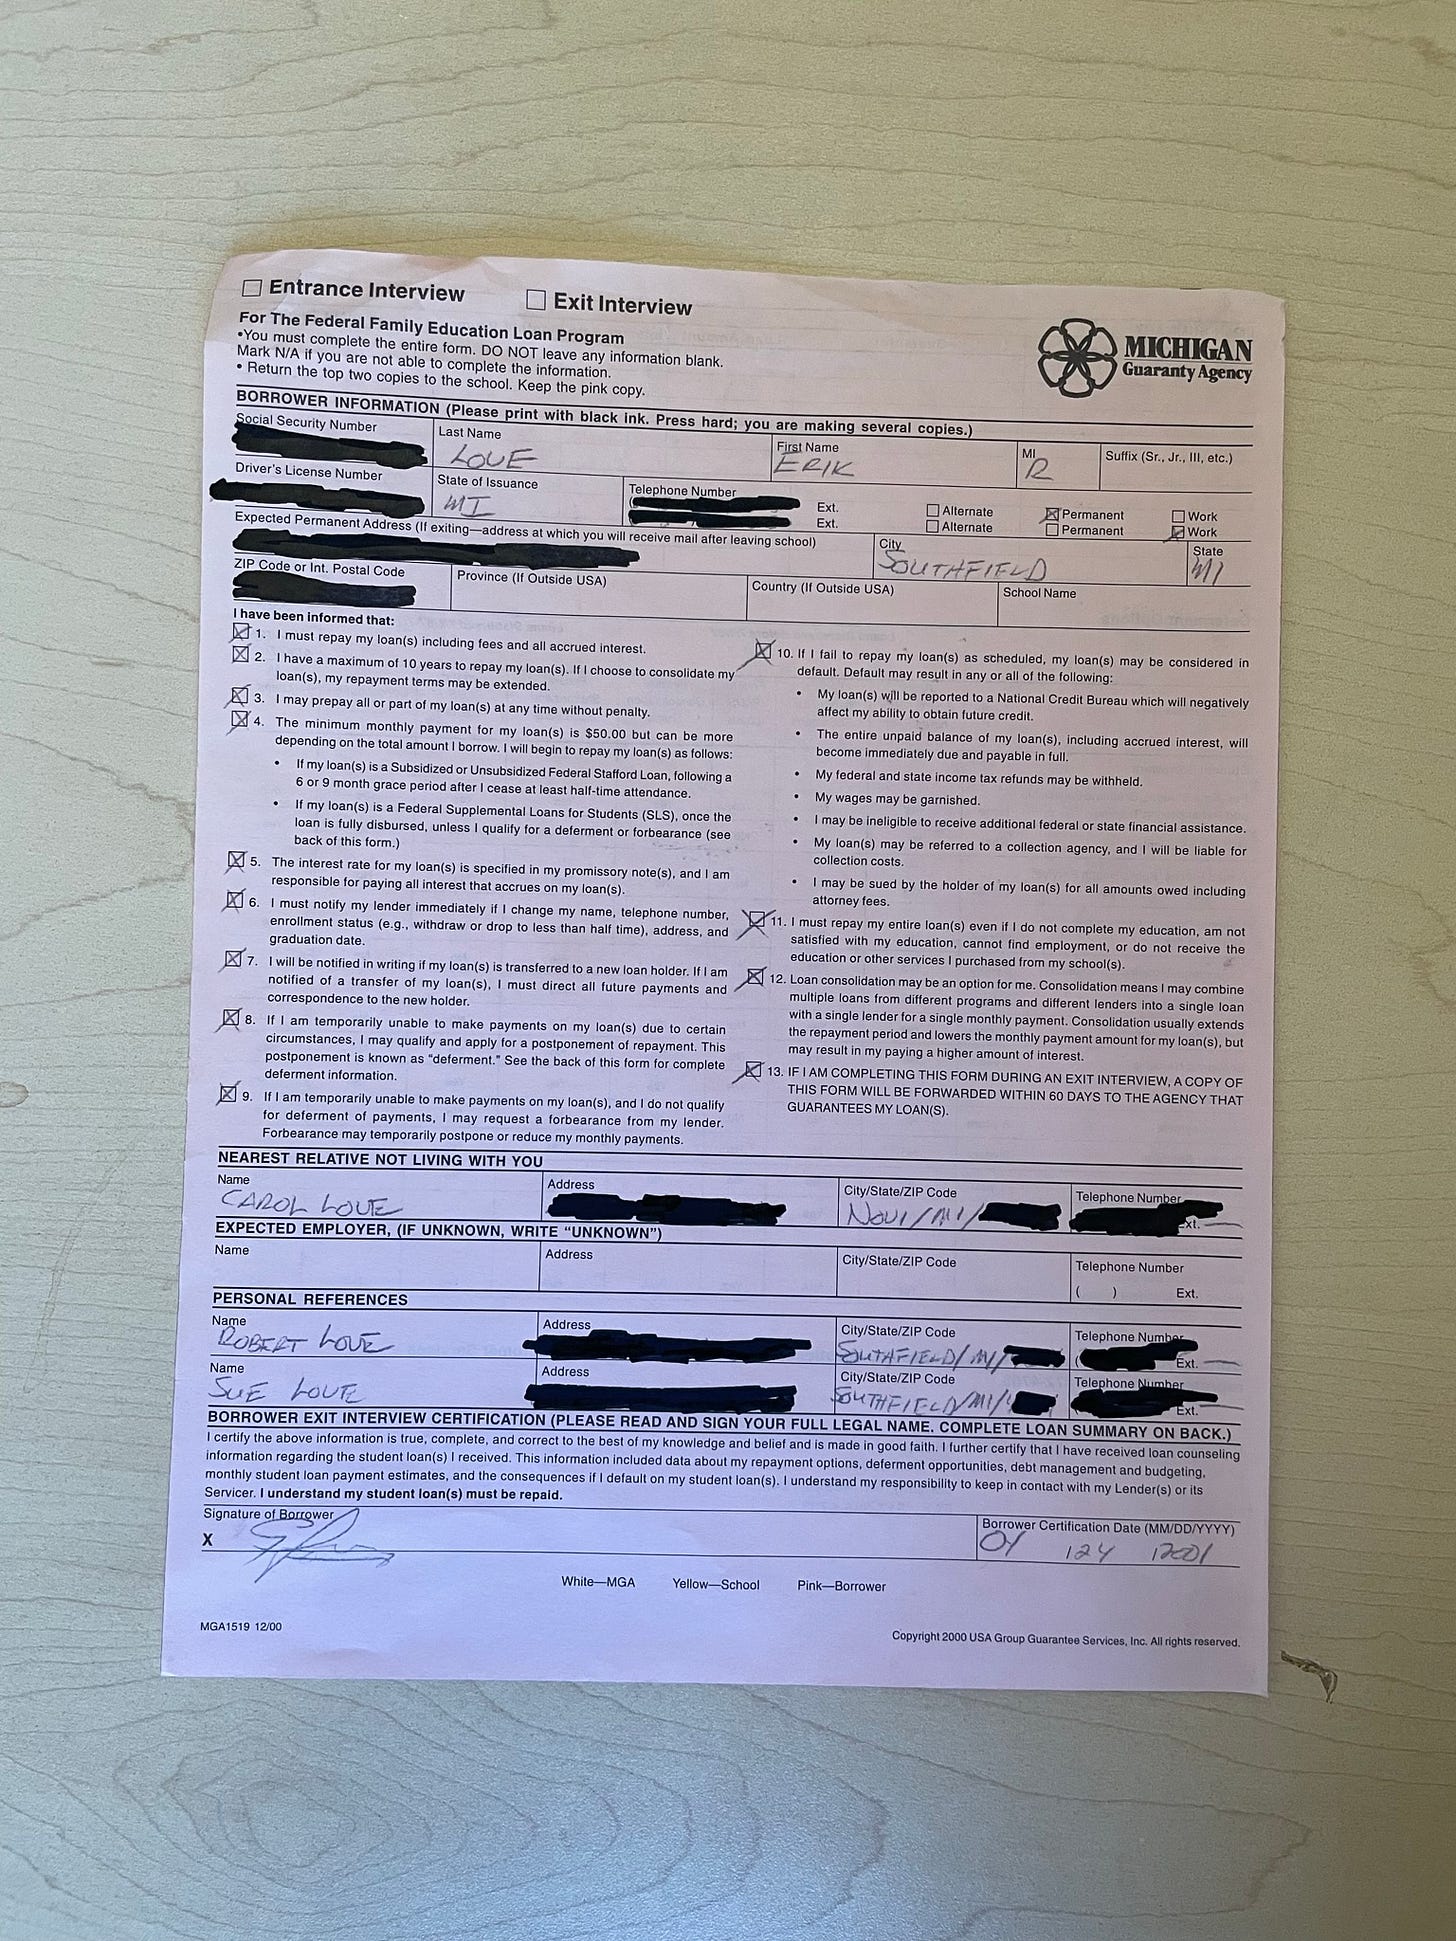 The pink "exit interview" form.